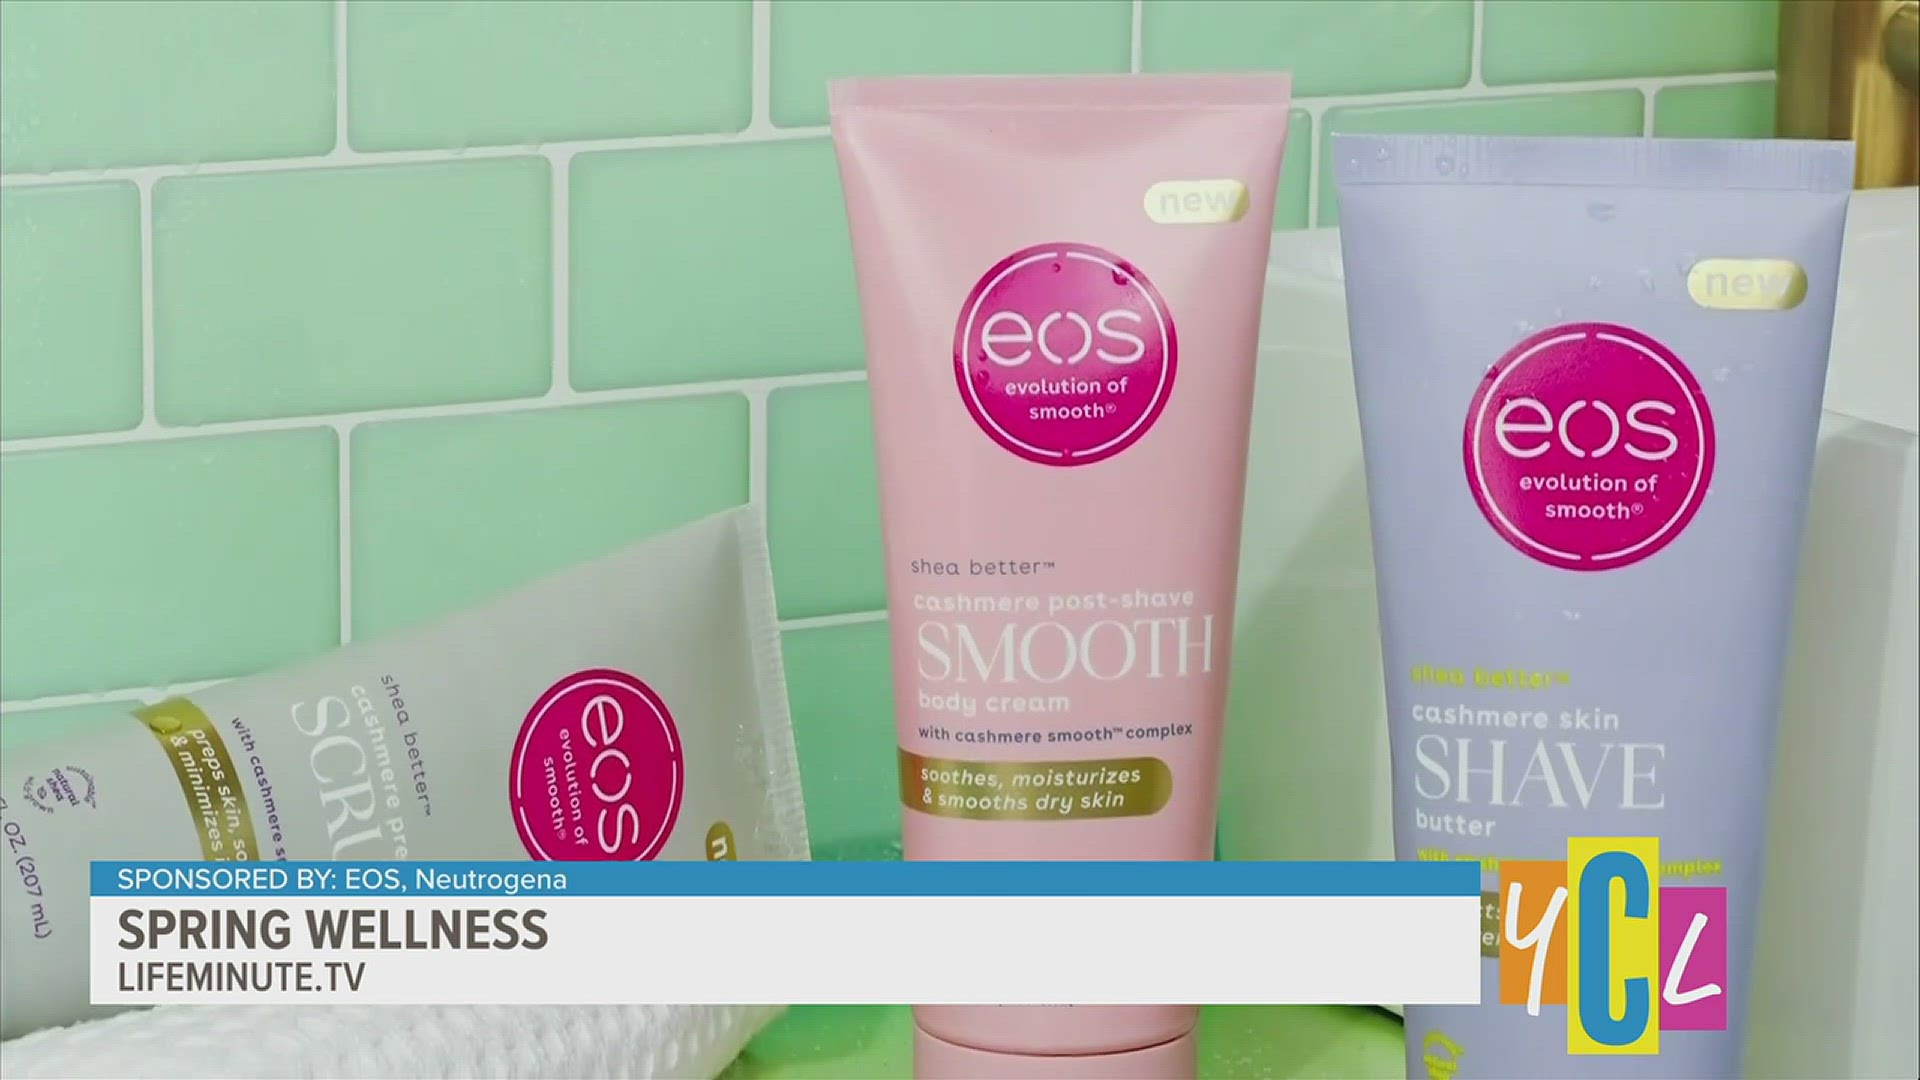 Spring is here so let's see what essentials will have us blossoming into the new season. This segment paid for by EOS, Neutrogena.